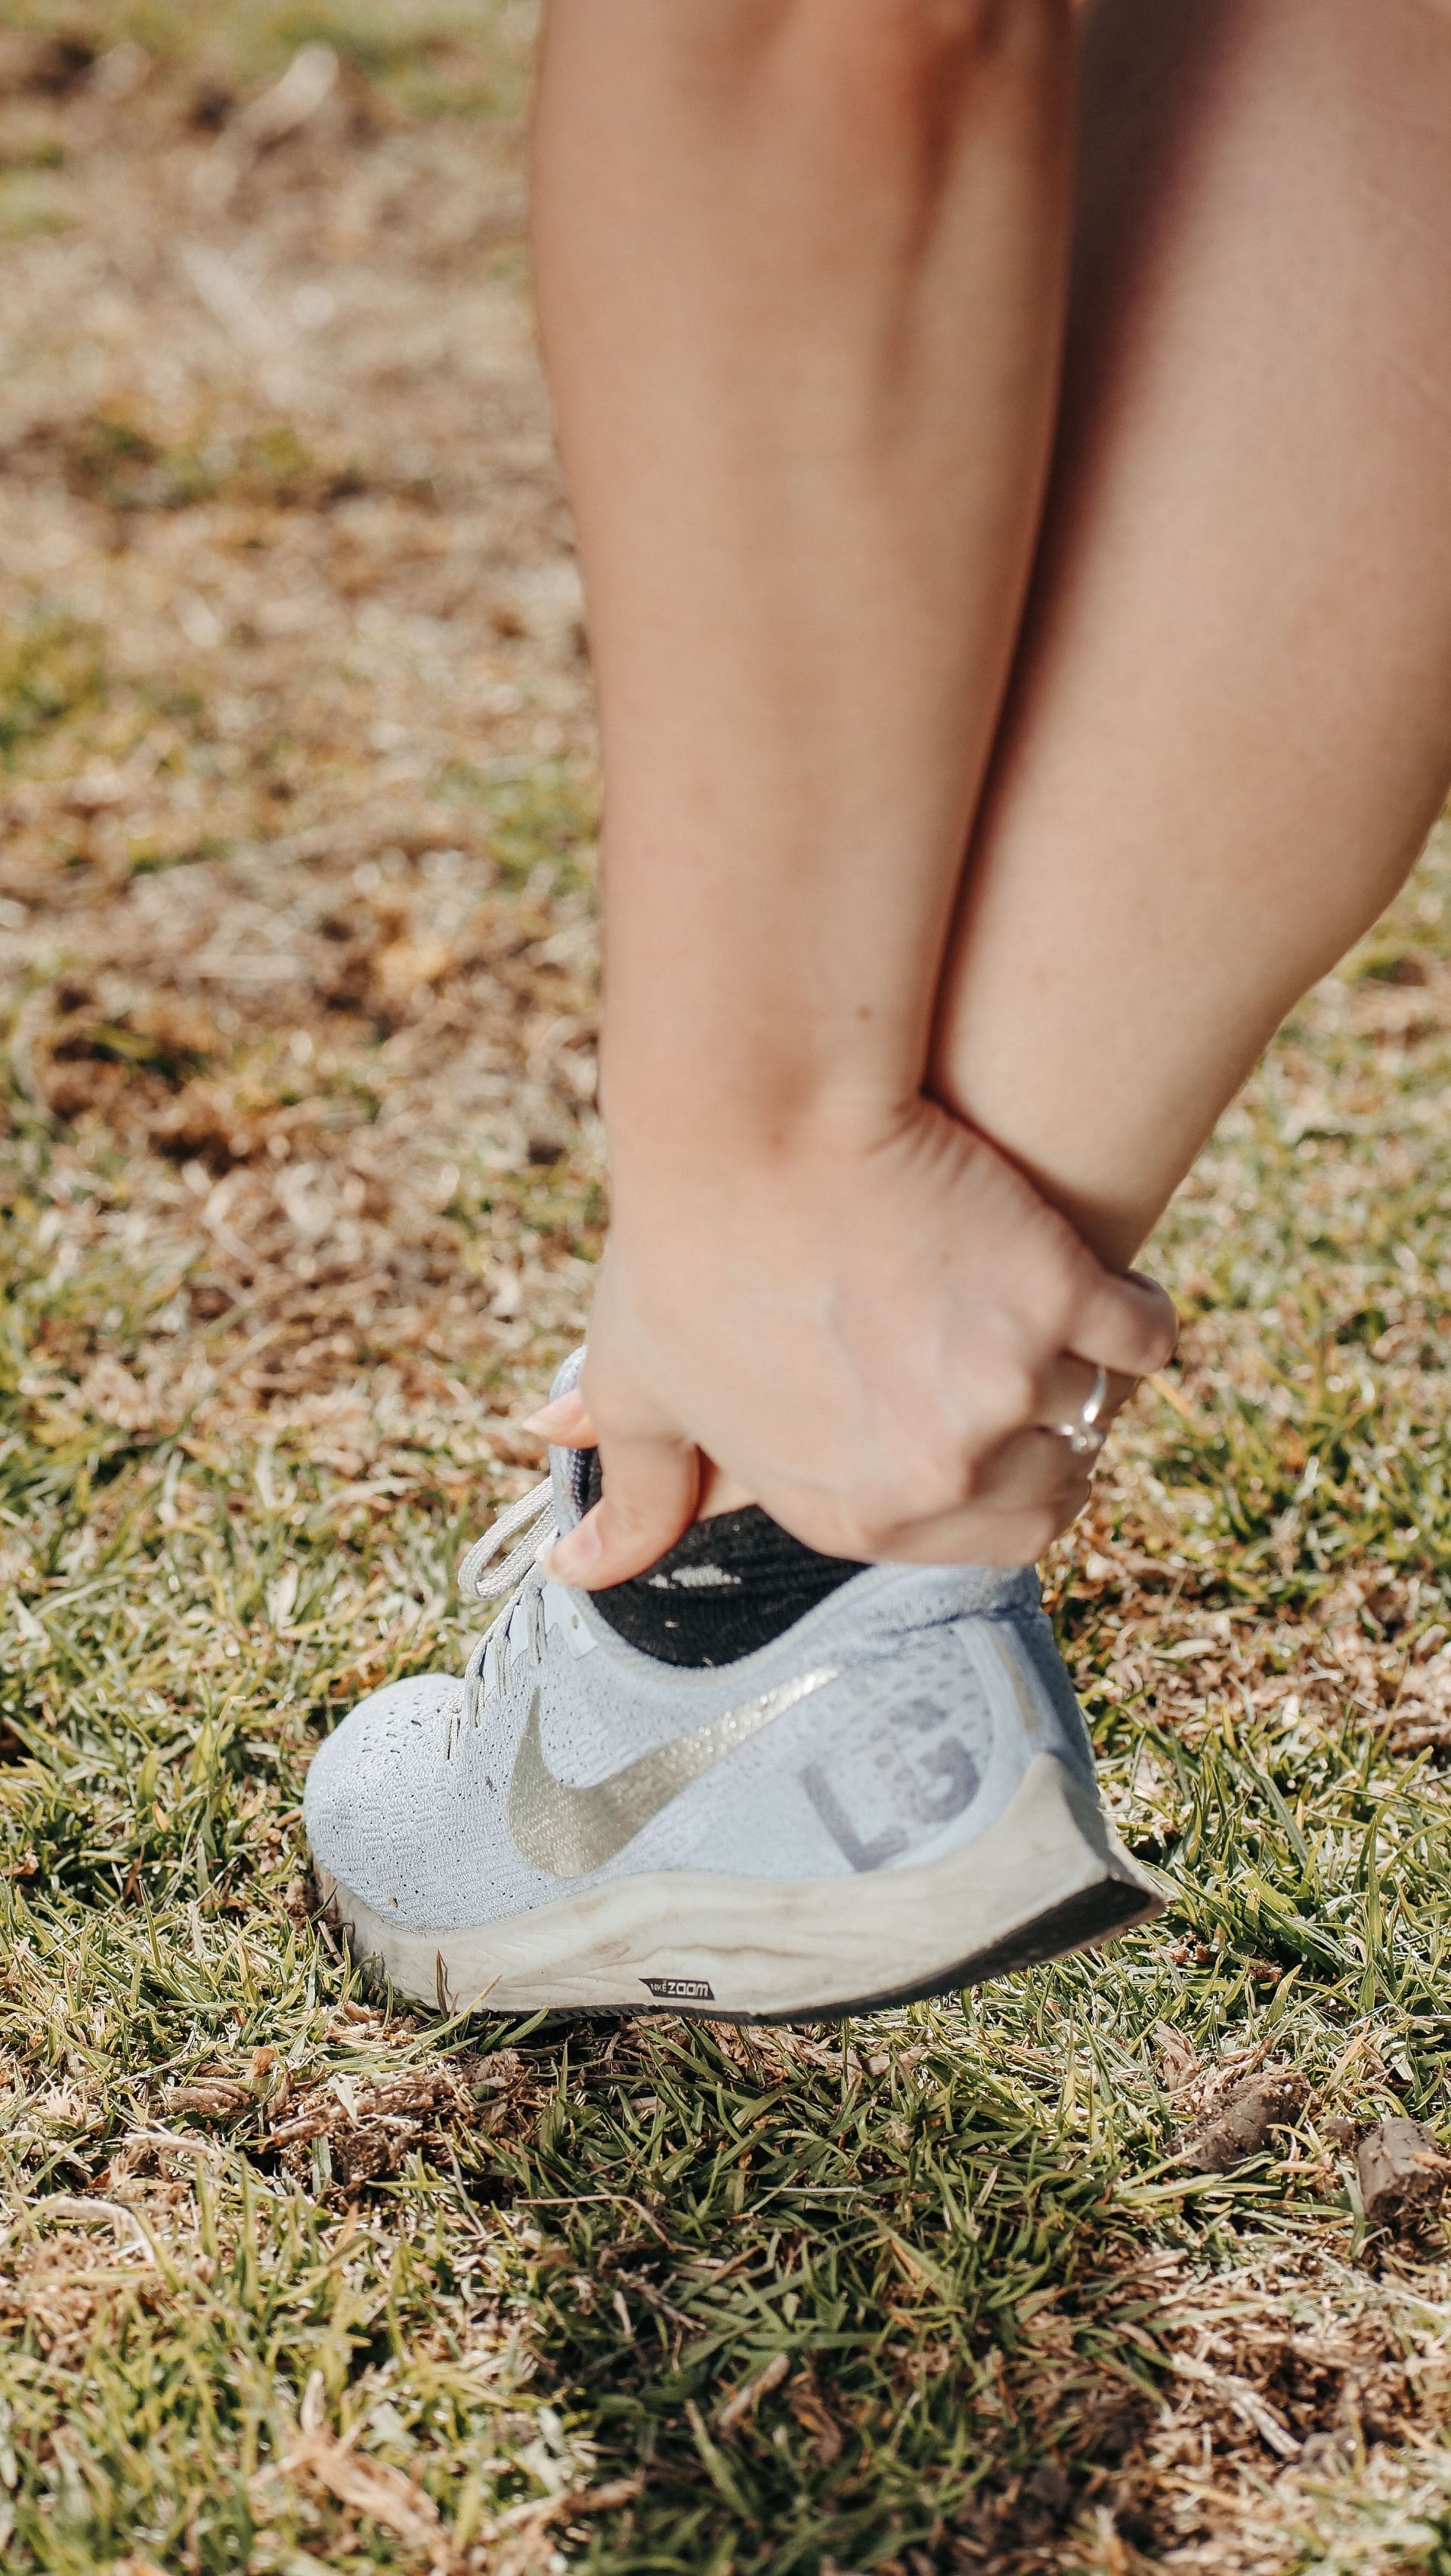 Say goodbye to Plantar Fasciitis pain with these natural treatments (Image via Pexels)